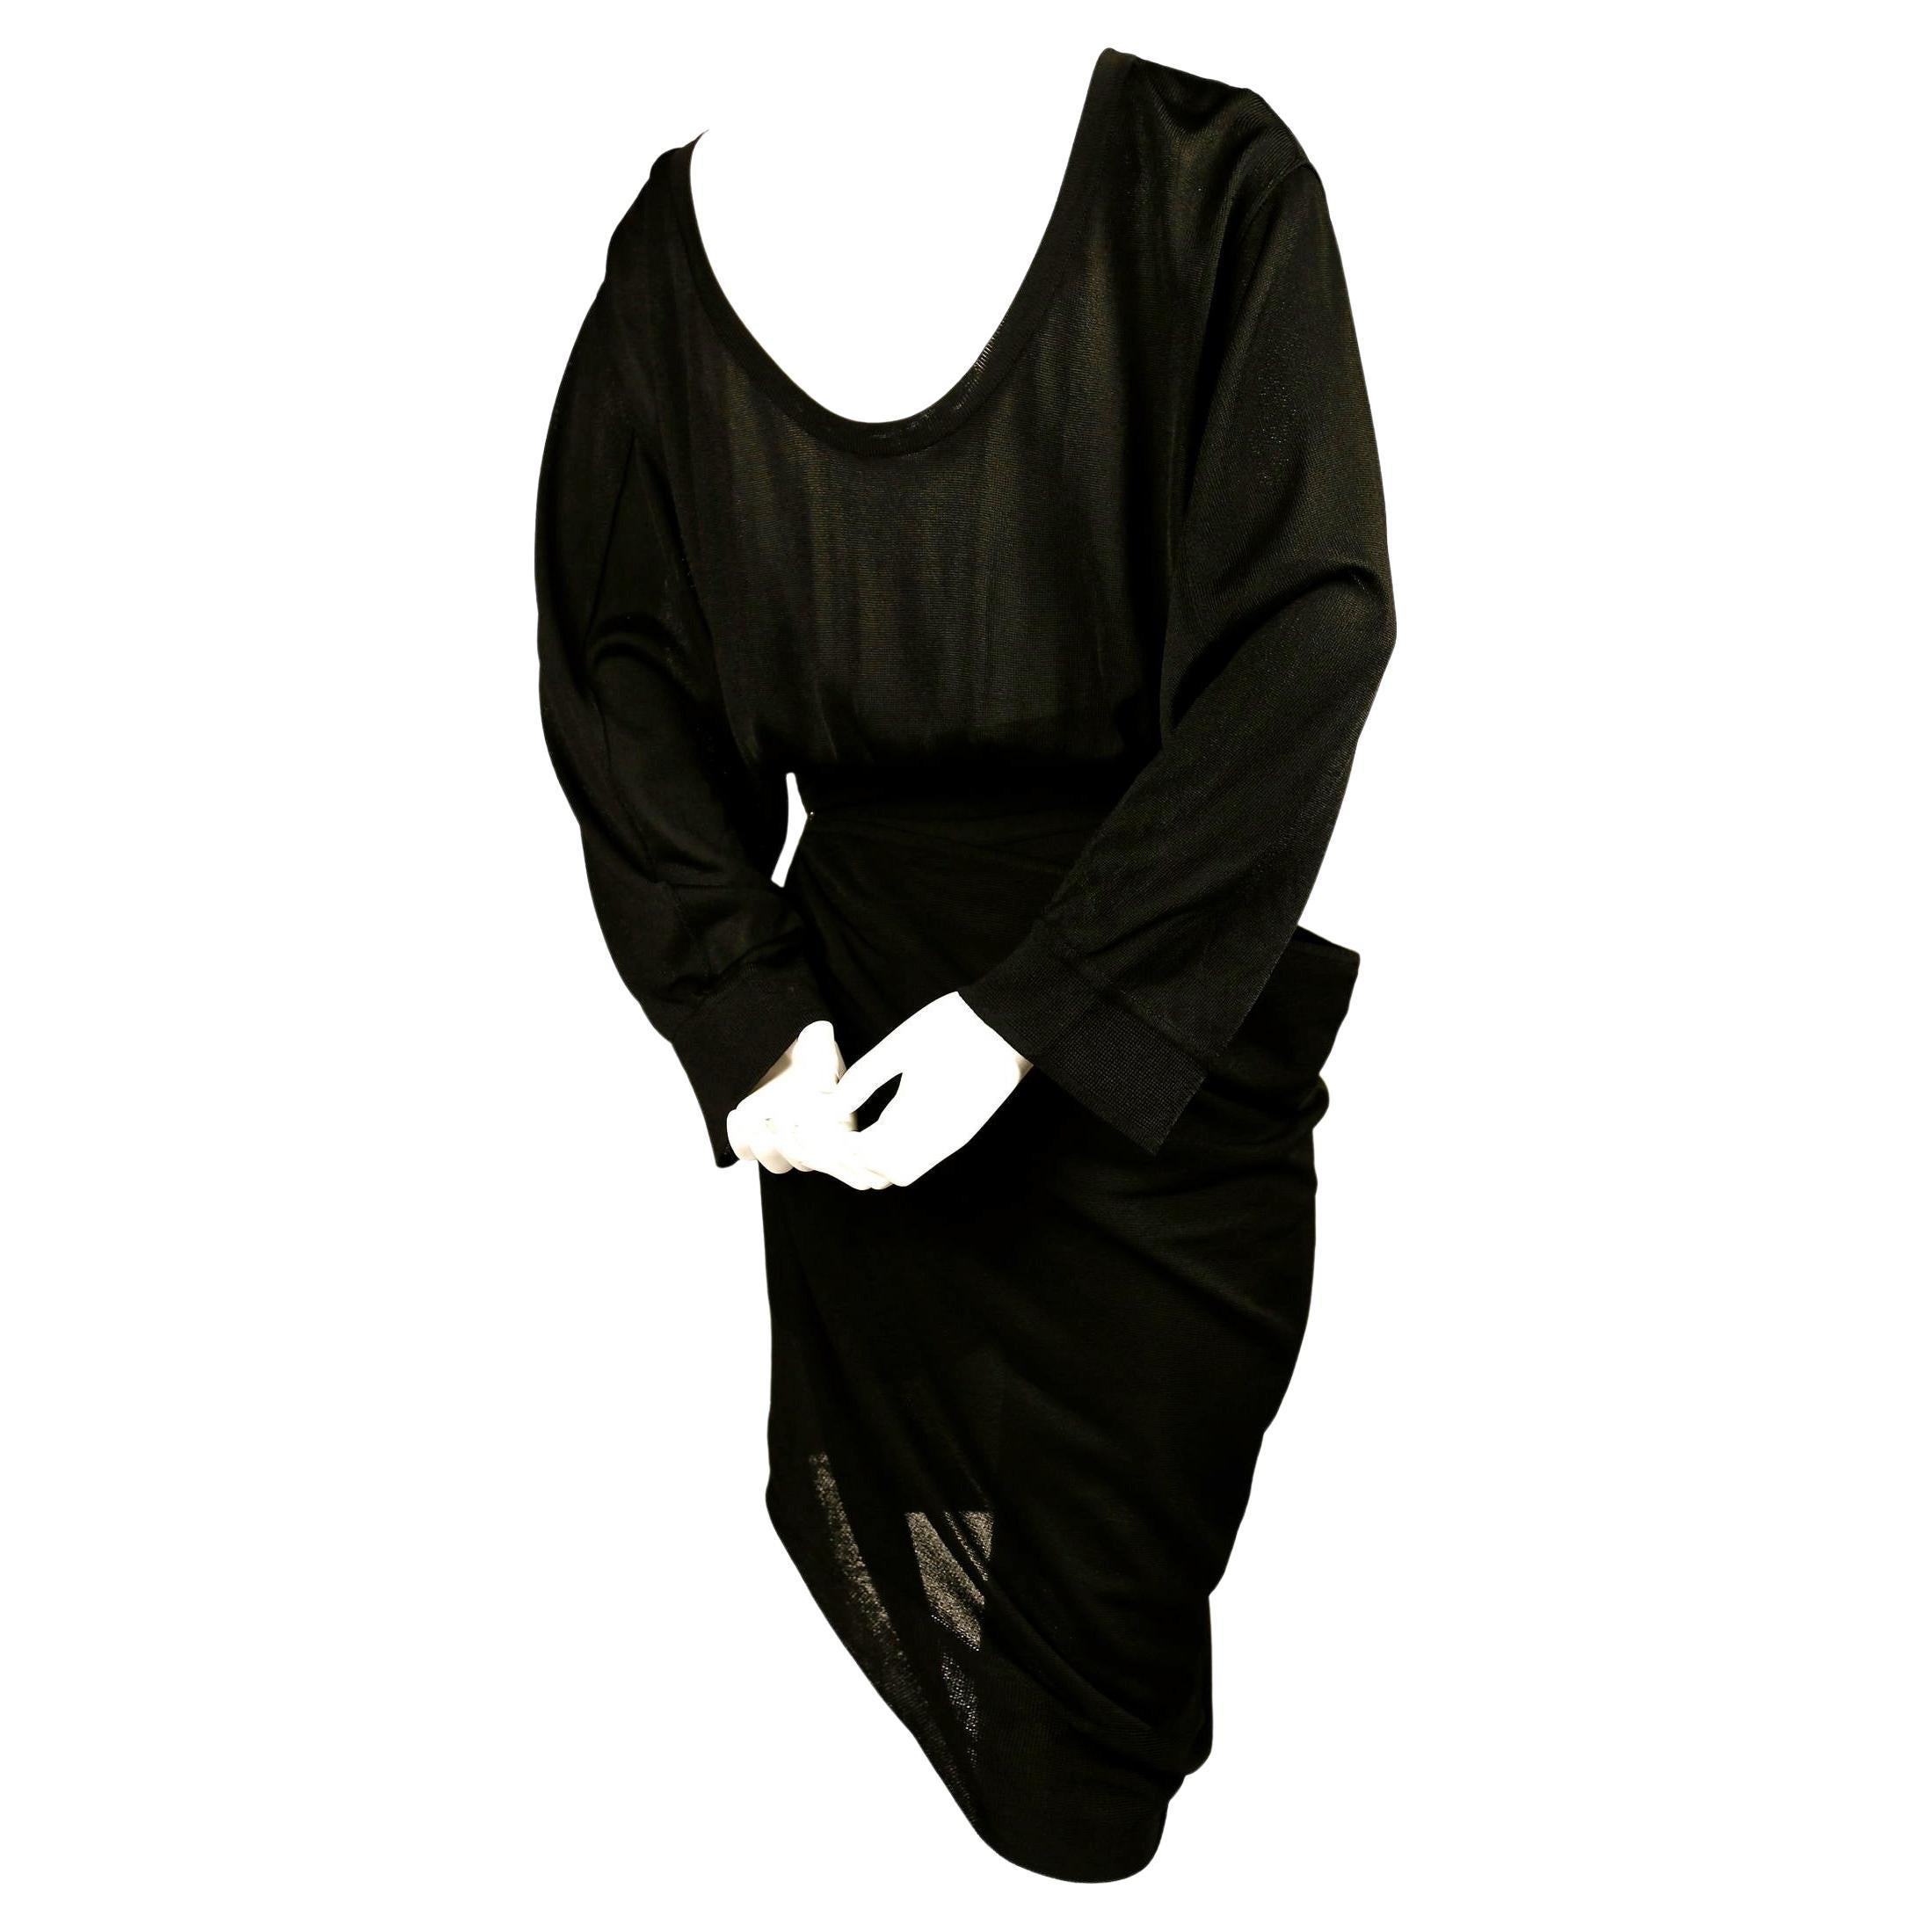  1984 AZZEDINE ALAIA jet black summer playsuit with draped skirt For Sale 1